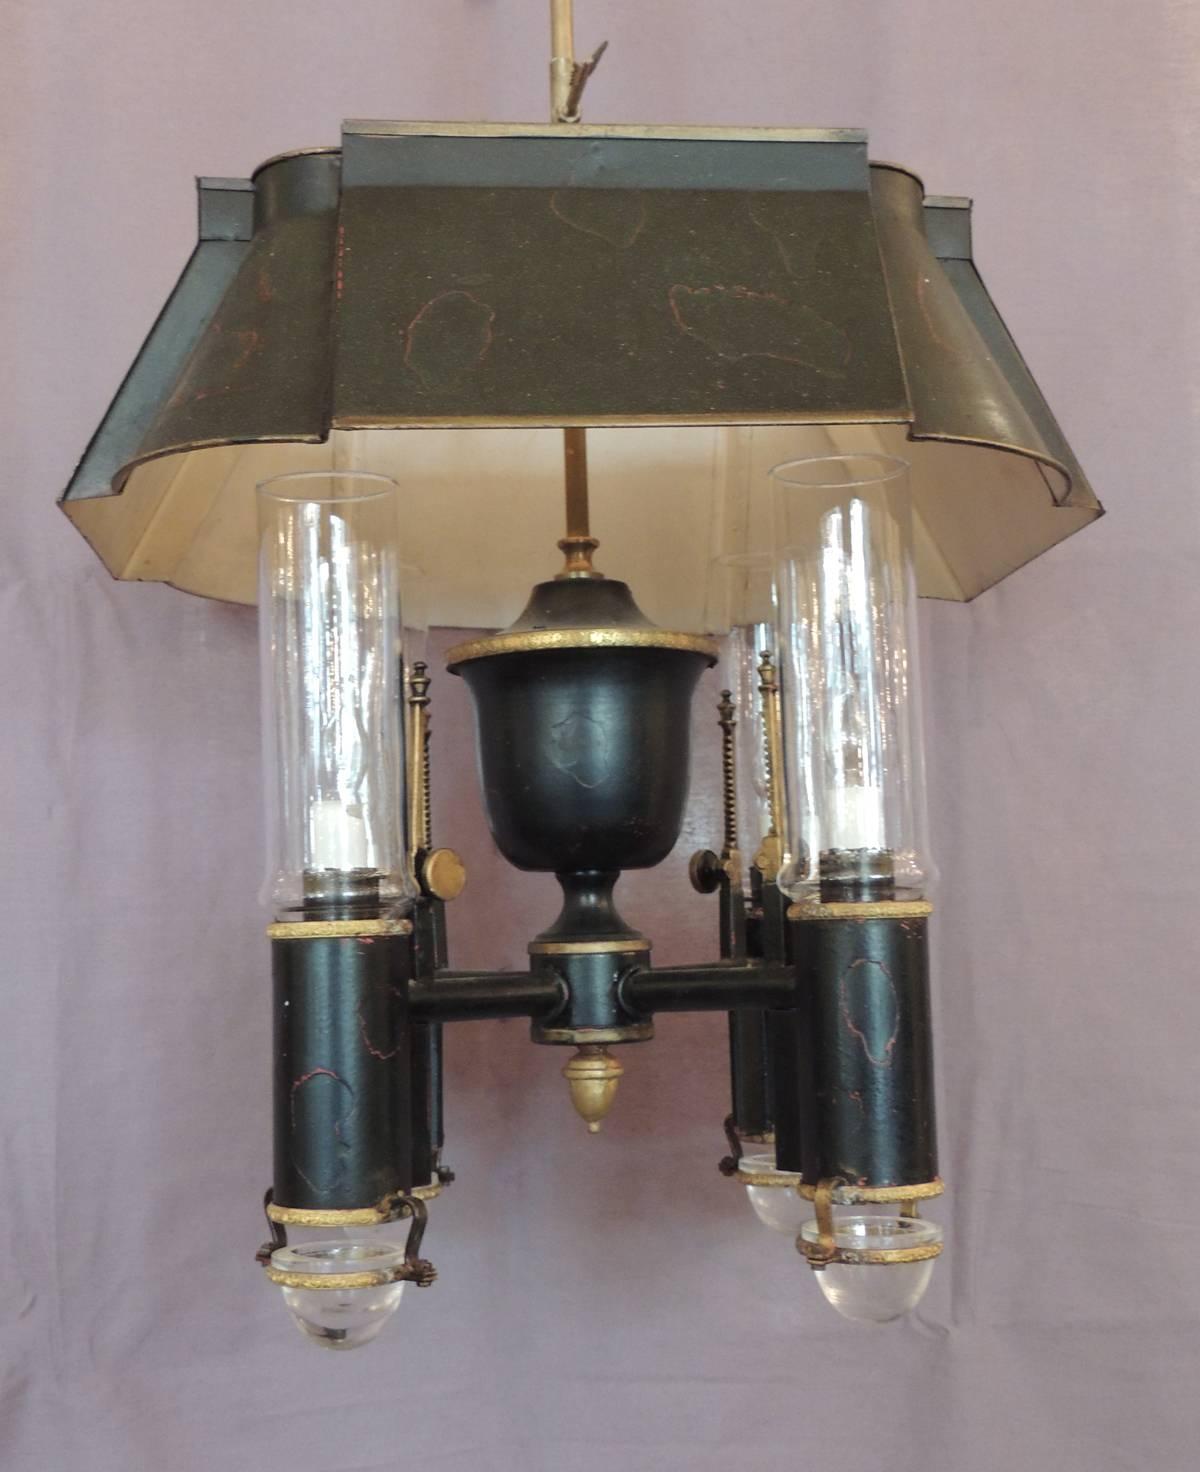 This chandelier was made in France in the 19th century, circa 1800, and features a tole shade surmounted over four lights. Each of the lights have a hurricane shade that fits perfectly into the argon shade. All the hardware is original and has been